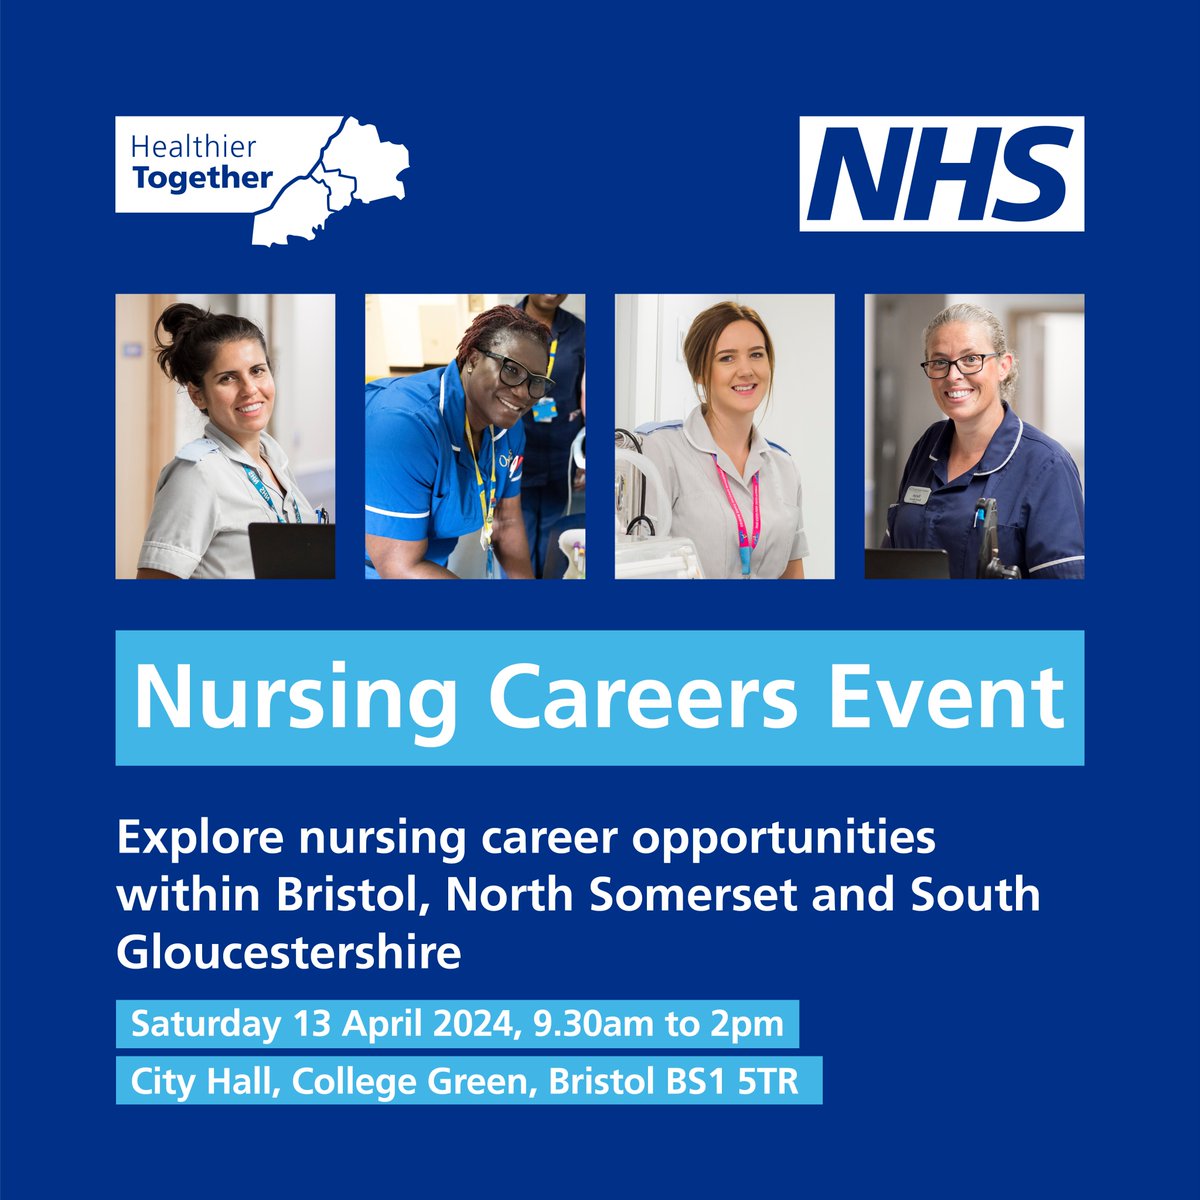 Just week to go until our Nursing Careers Event! 📅 Saturday 13 April ⏰ 9:30am - 2pm 📍 City Hall, Bristol Connect with employers, discuss your career goals, and explore CPD sessions on different nursing roles. Register 👉 orlo.uk/9LxQN orlo.uk/EgxnZ